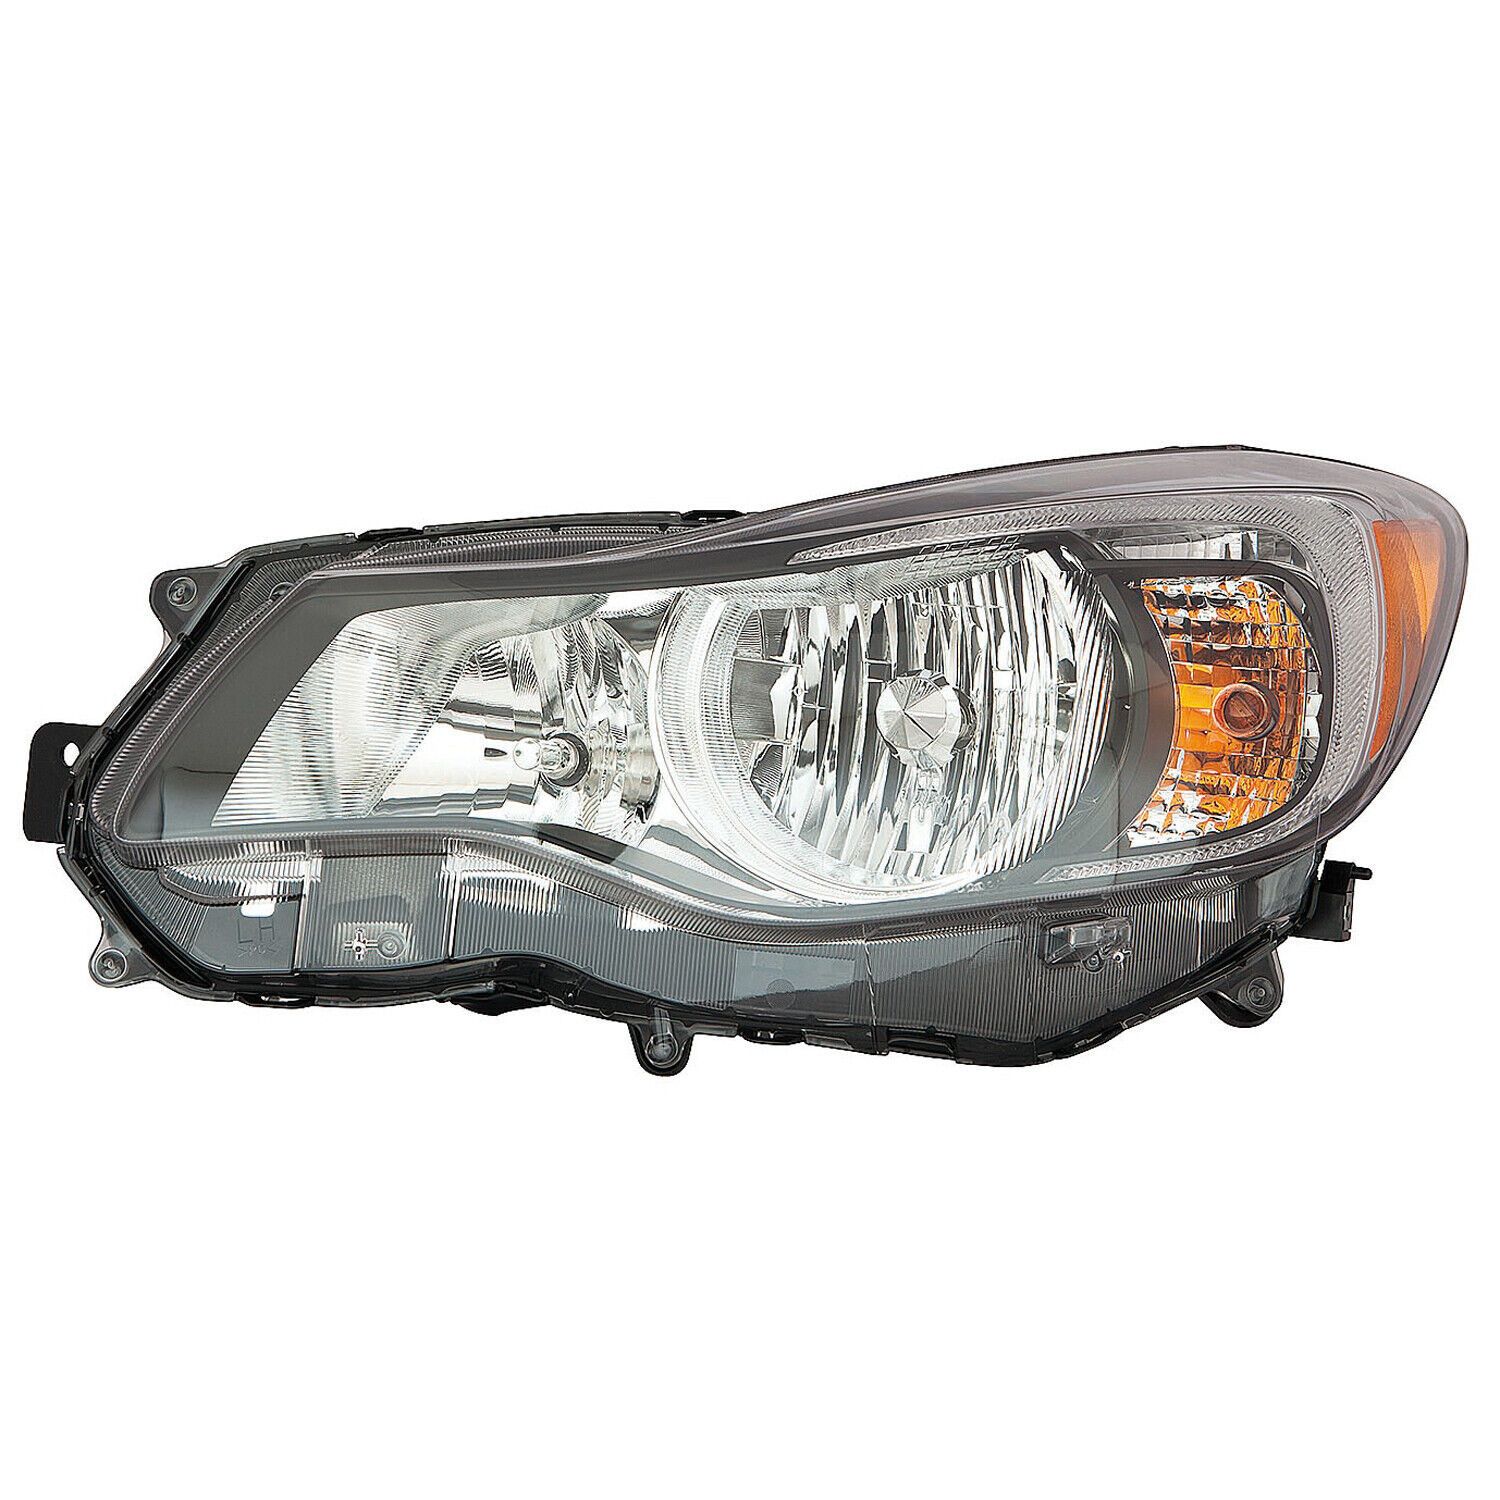 SU2502154R Reconditioned Driver Side Headlight Assembly